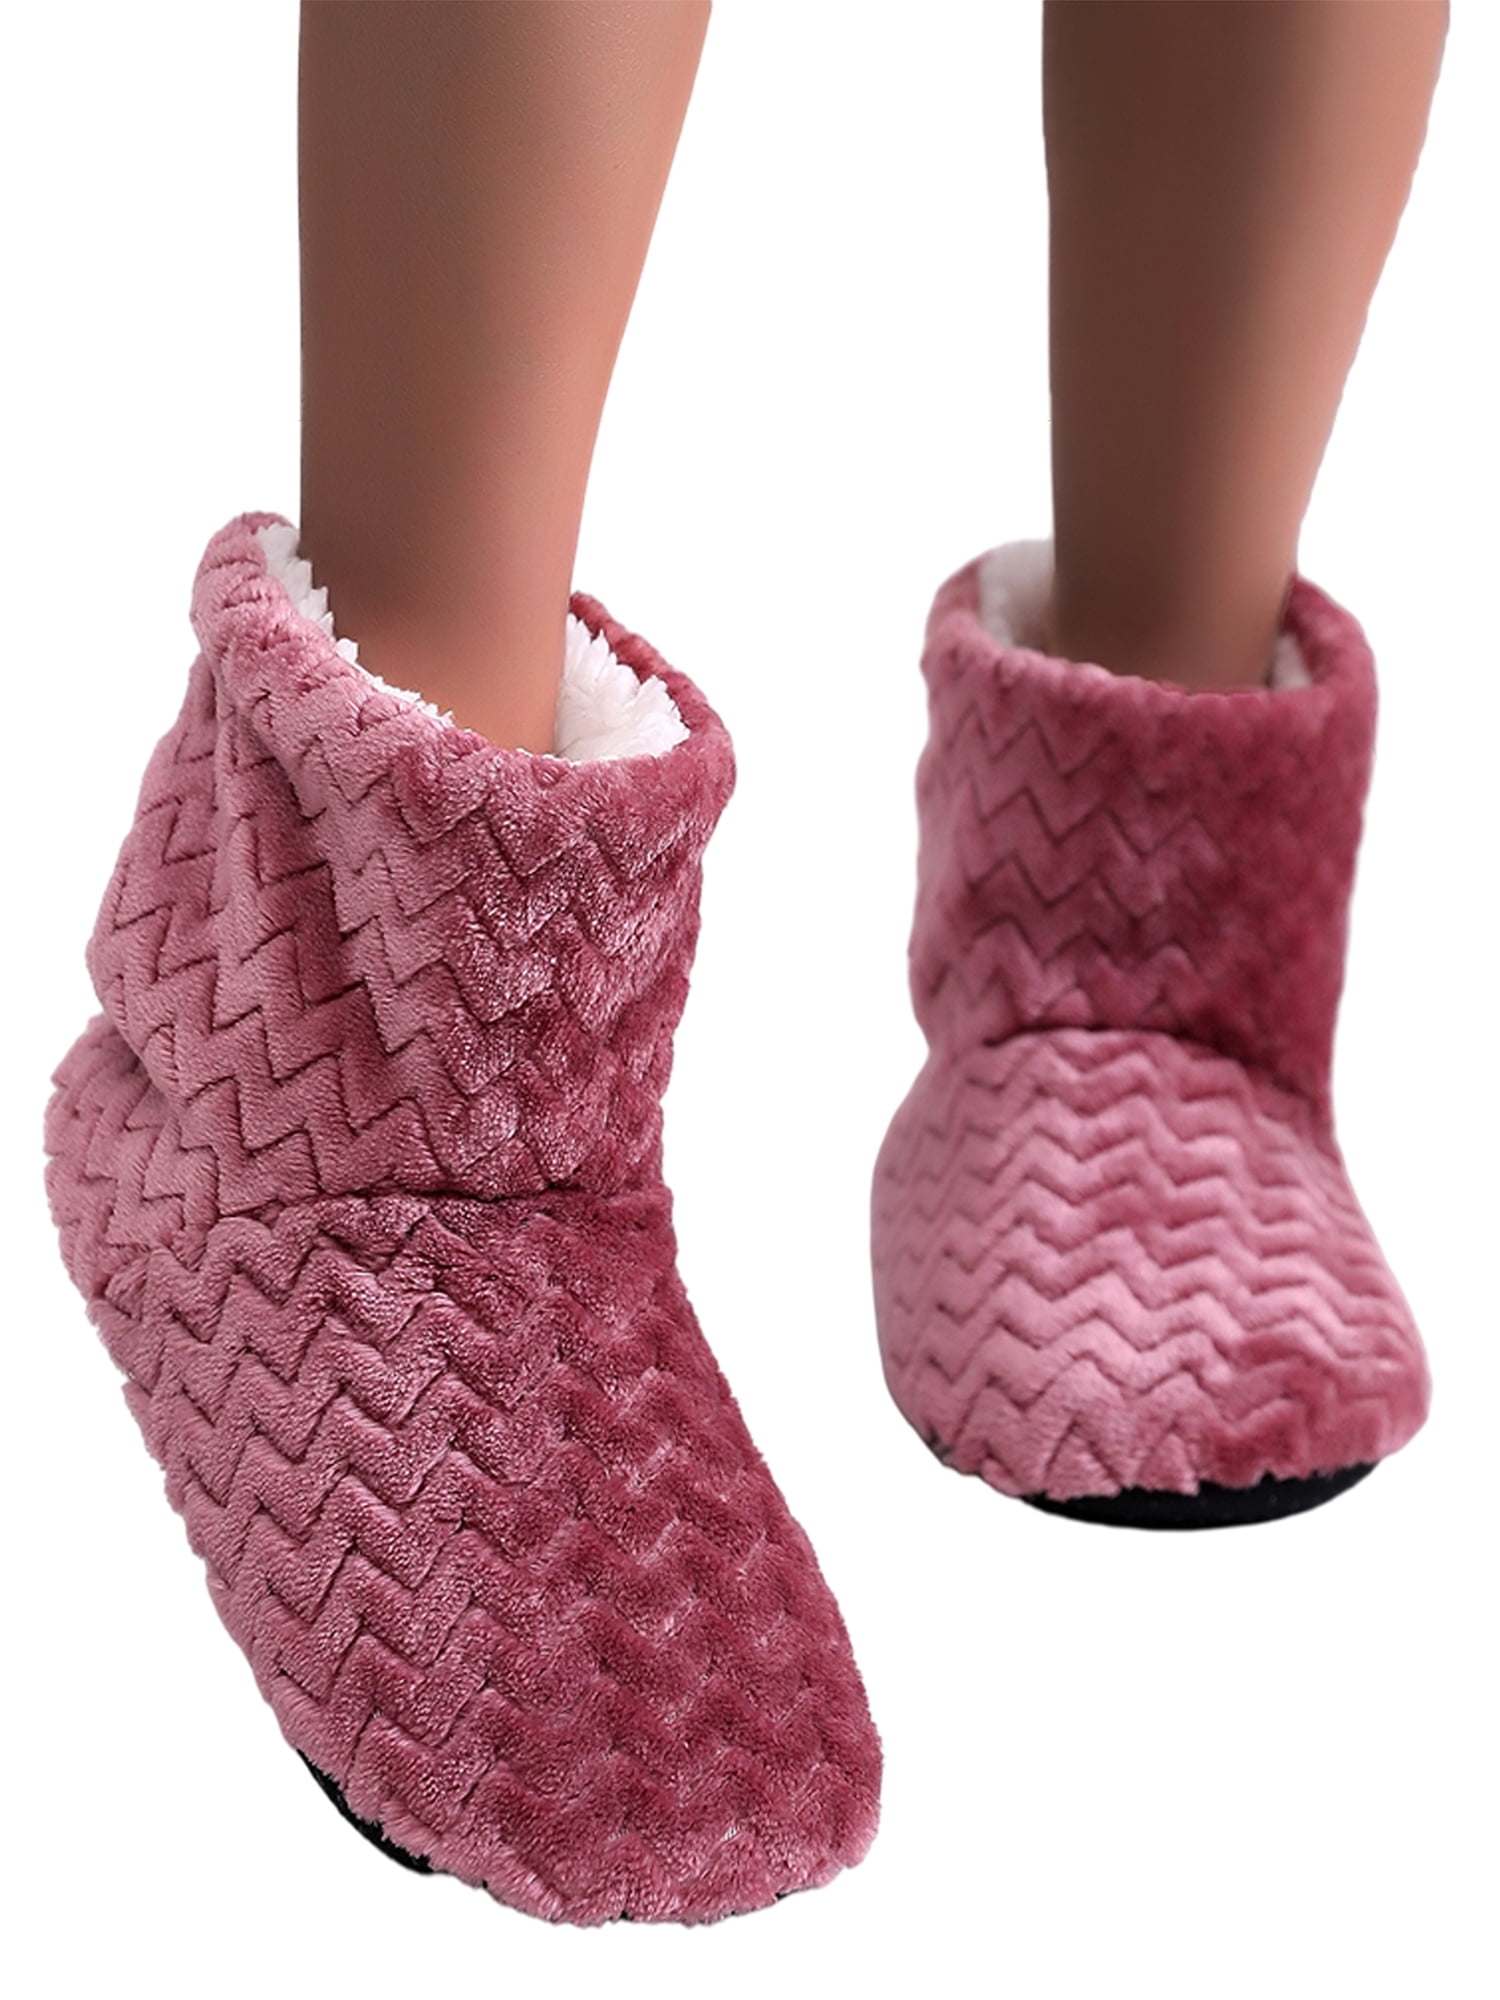 MaaMgic Women Girls Slipper Premium Soft Home Non-Slip Winter Extra Warm Thermal Knitted Shoes